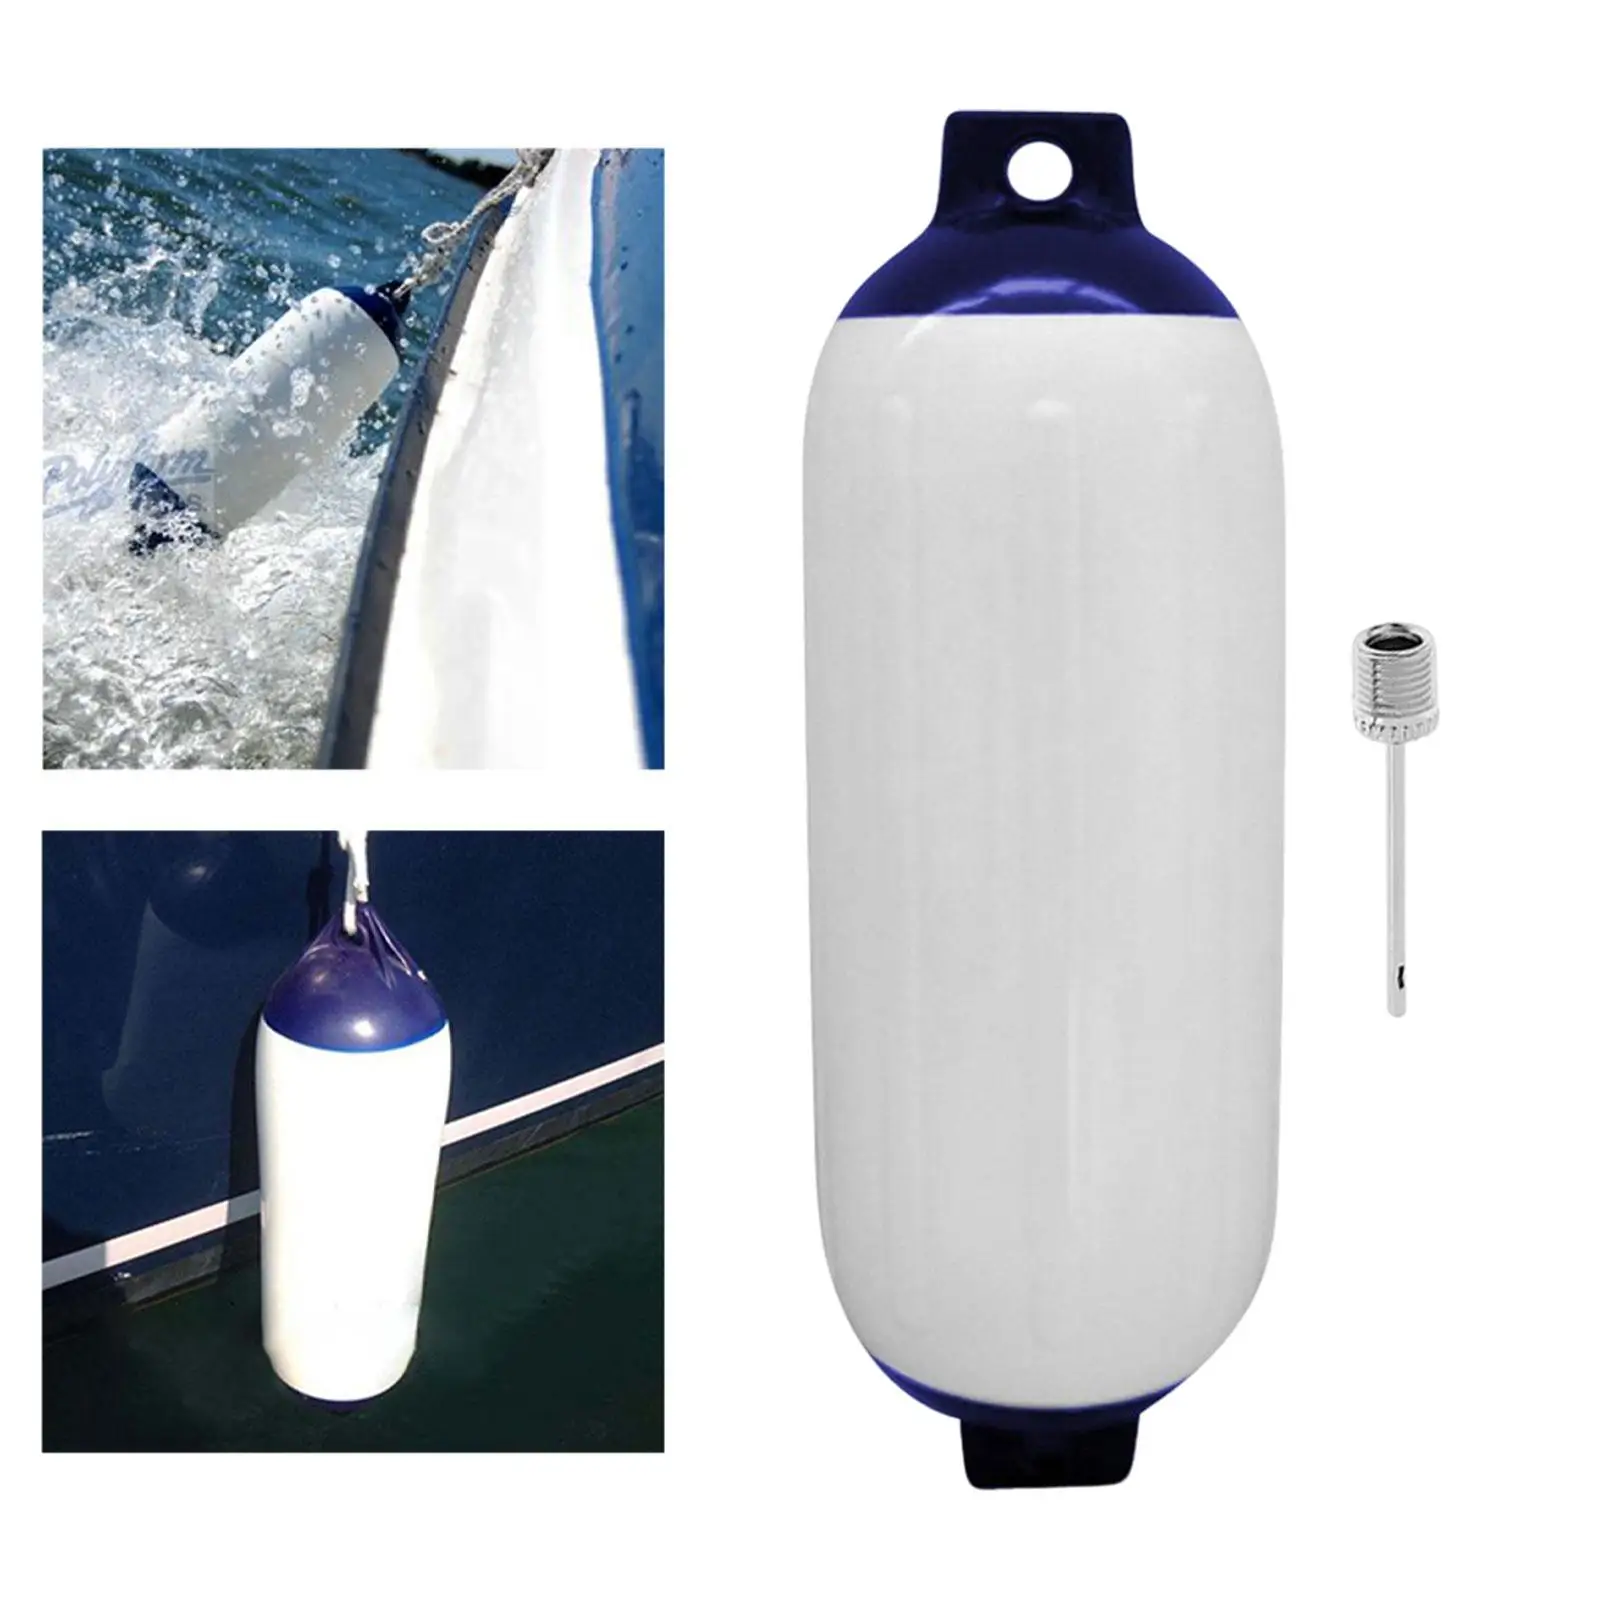 Boat, Reinforced Eye Ends with Inflating Boat Bumpers for Docking for Sailboats